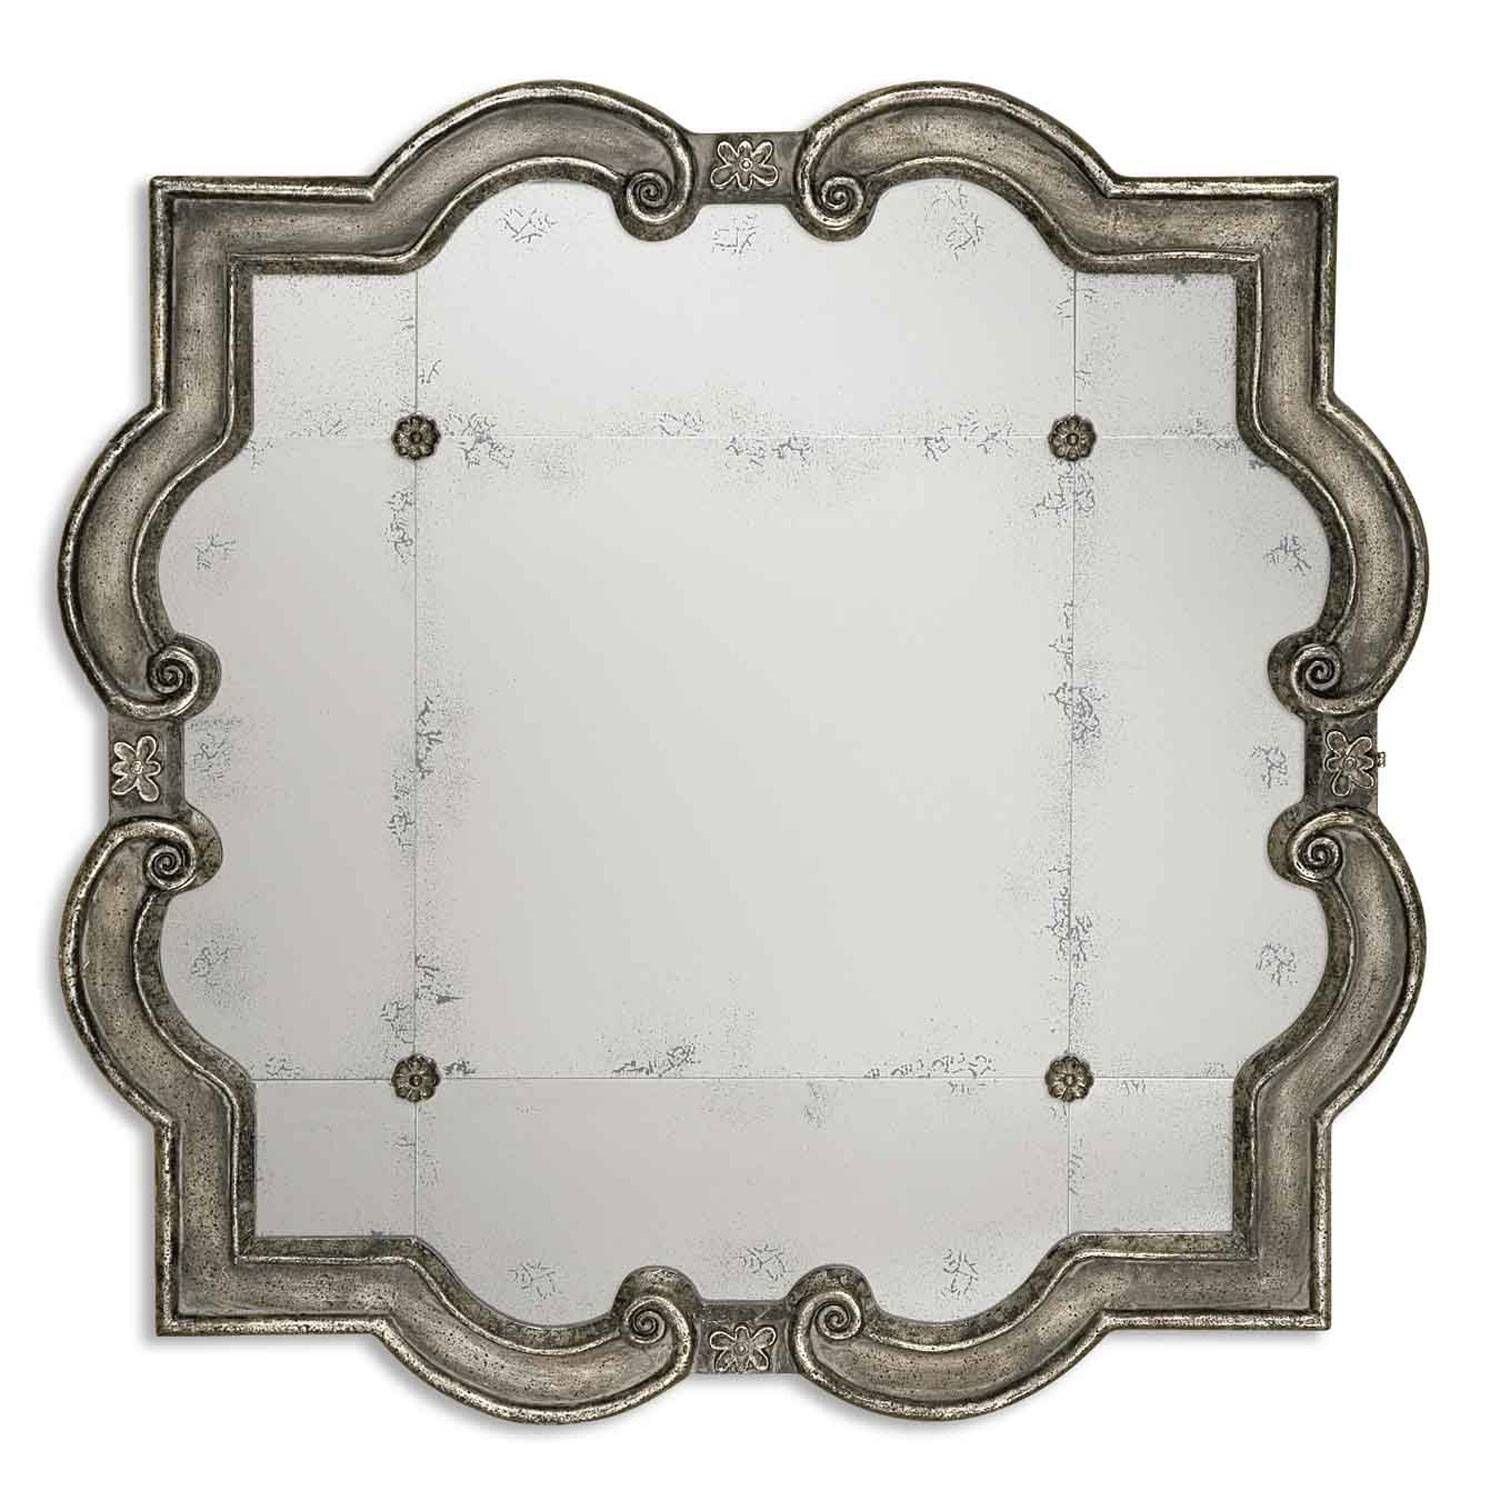 Prisca Small Mirror Uttermost Wall Mirror Mirrors Home Decor Pertaining To Antique Silver Mirrors (View 15 of 15)